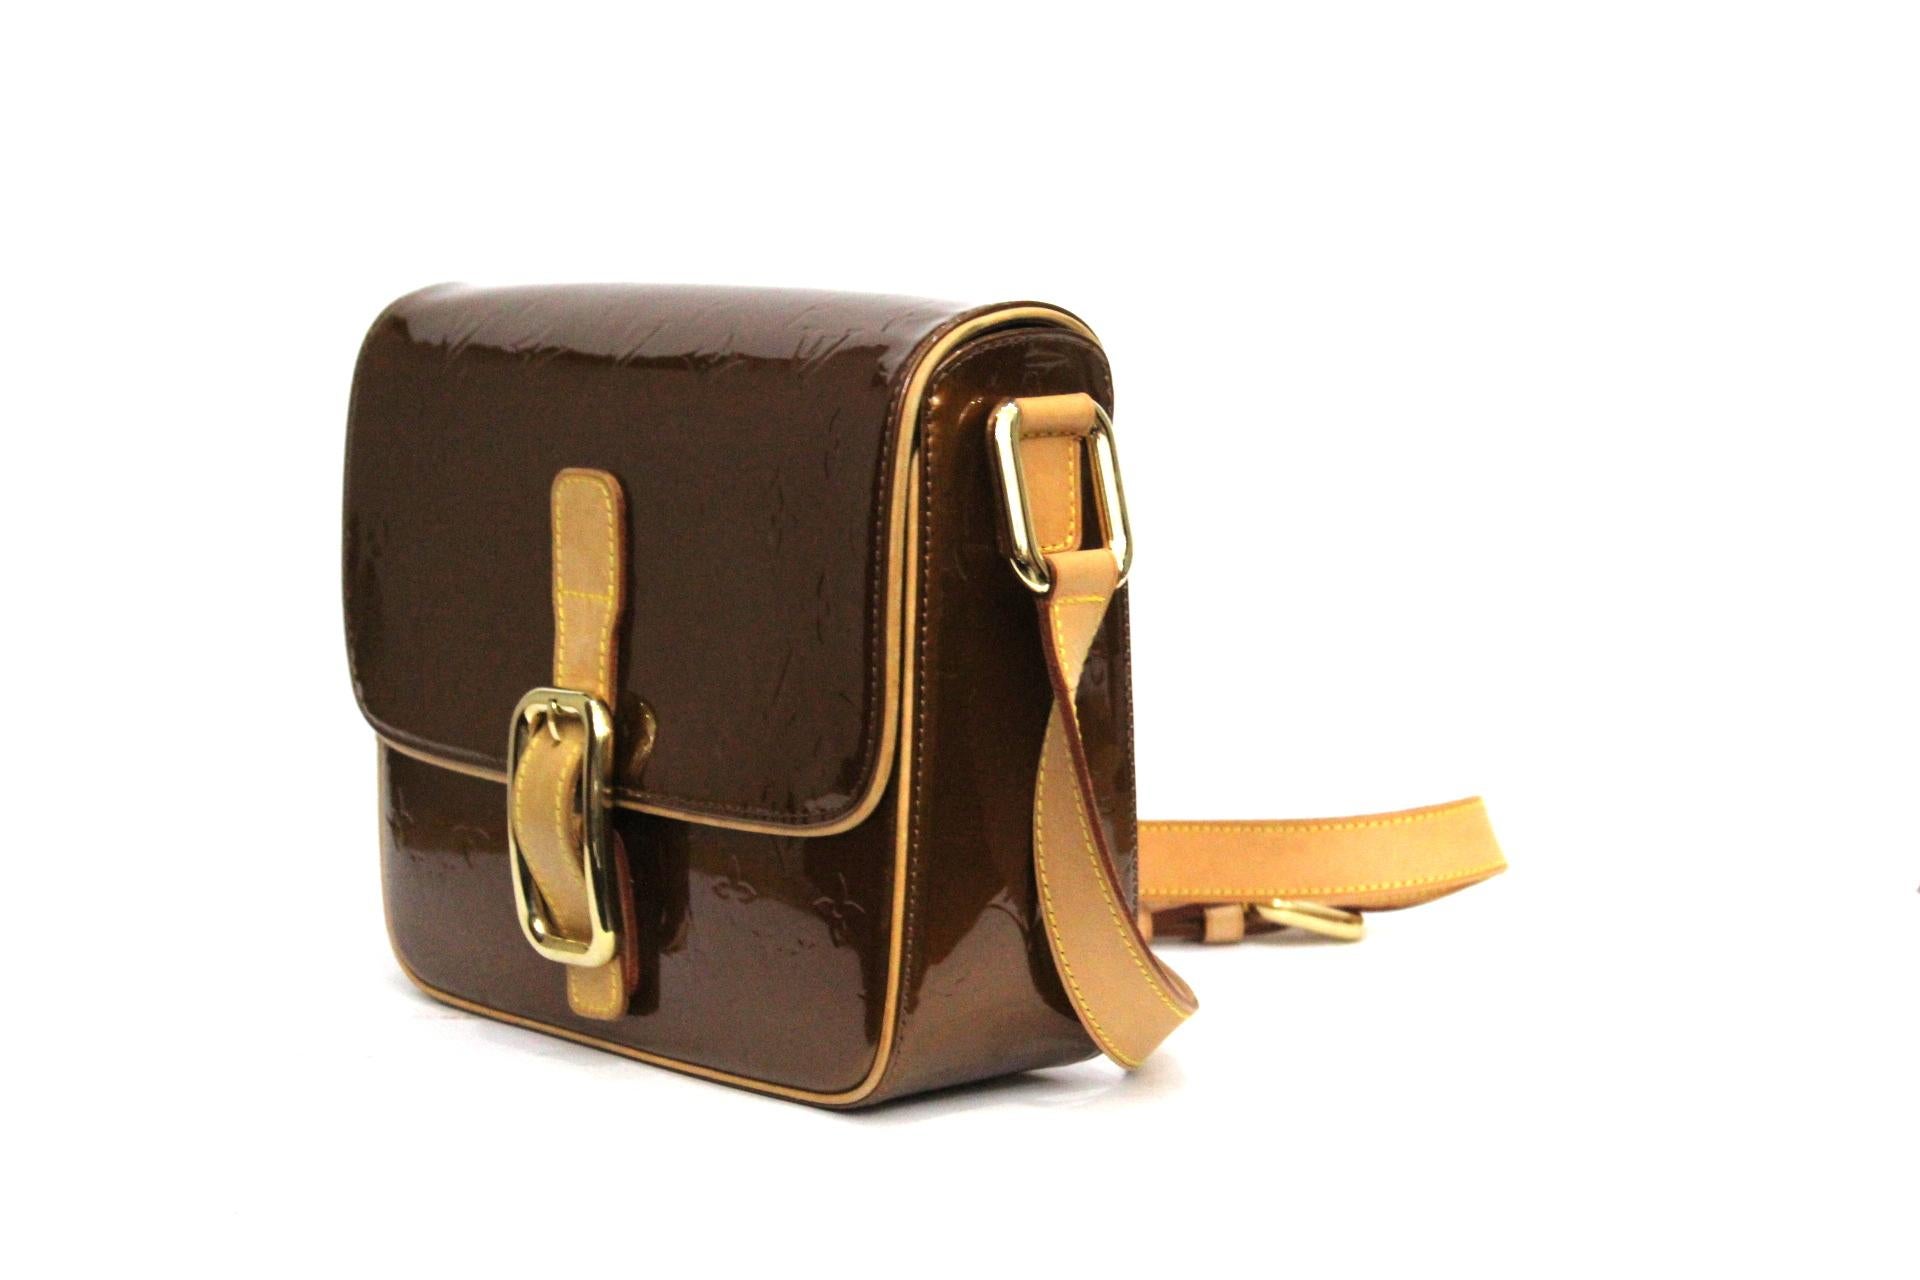 Striking Vernis leather, flap top with buckle and strap closure, gold tone hardware, cowhide leather trimming and adjustable shoulder strap currently set at 20-inch drop. A slip-in pocket on the back. Man made brown leather lining inside with one